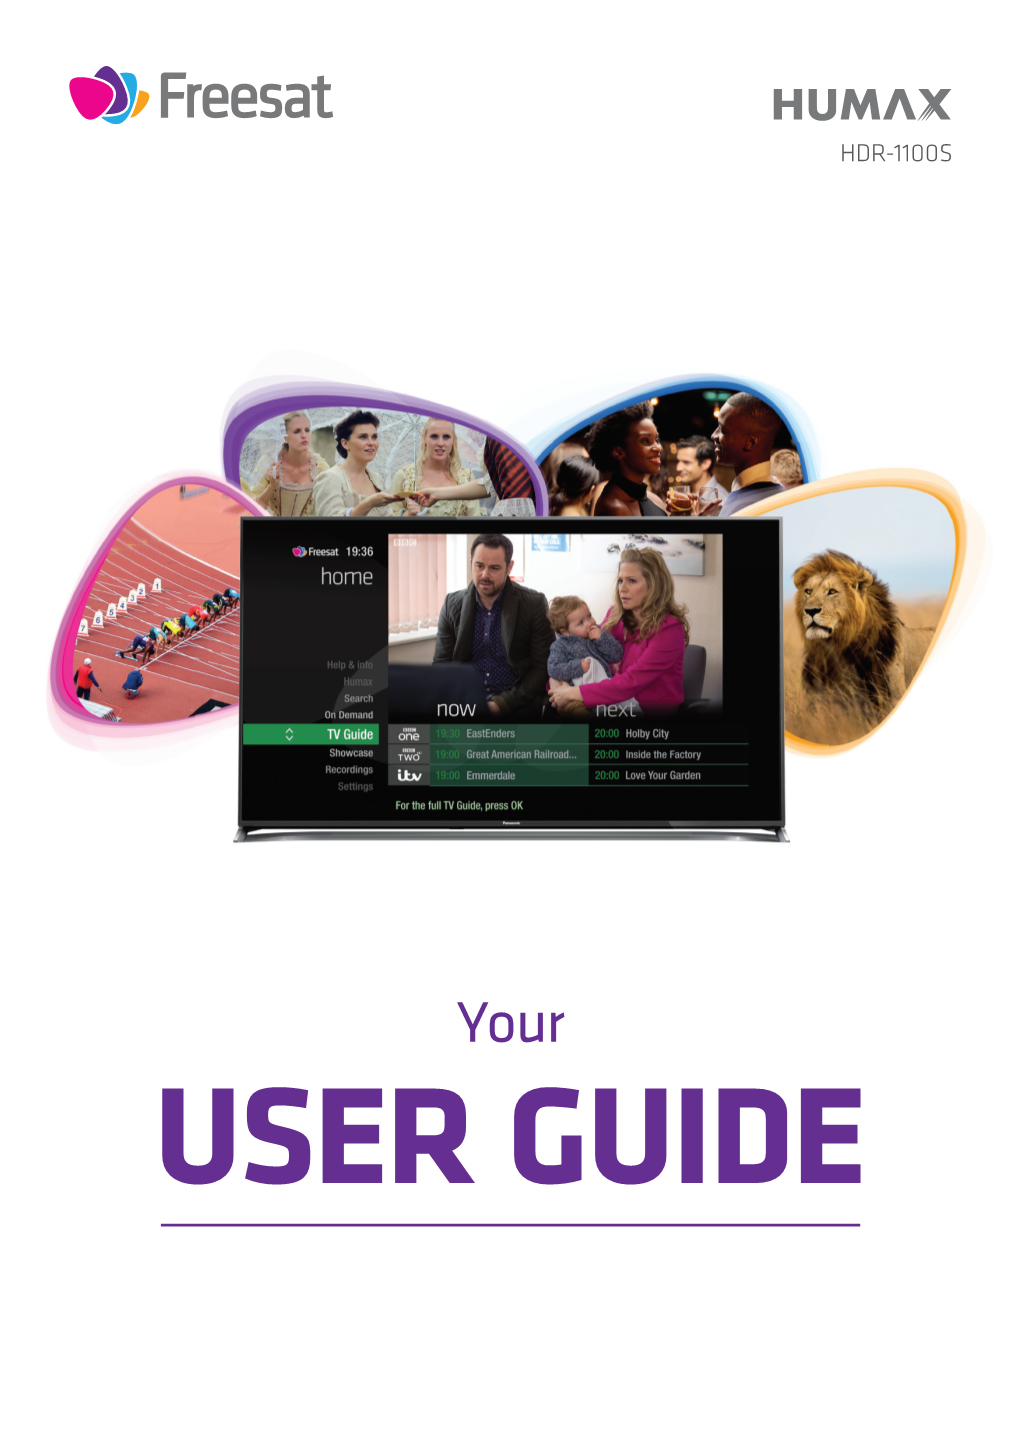 USER GUIDE Welcome to Freesat